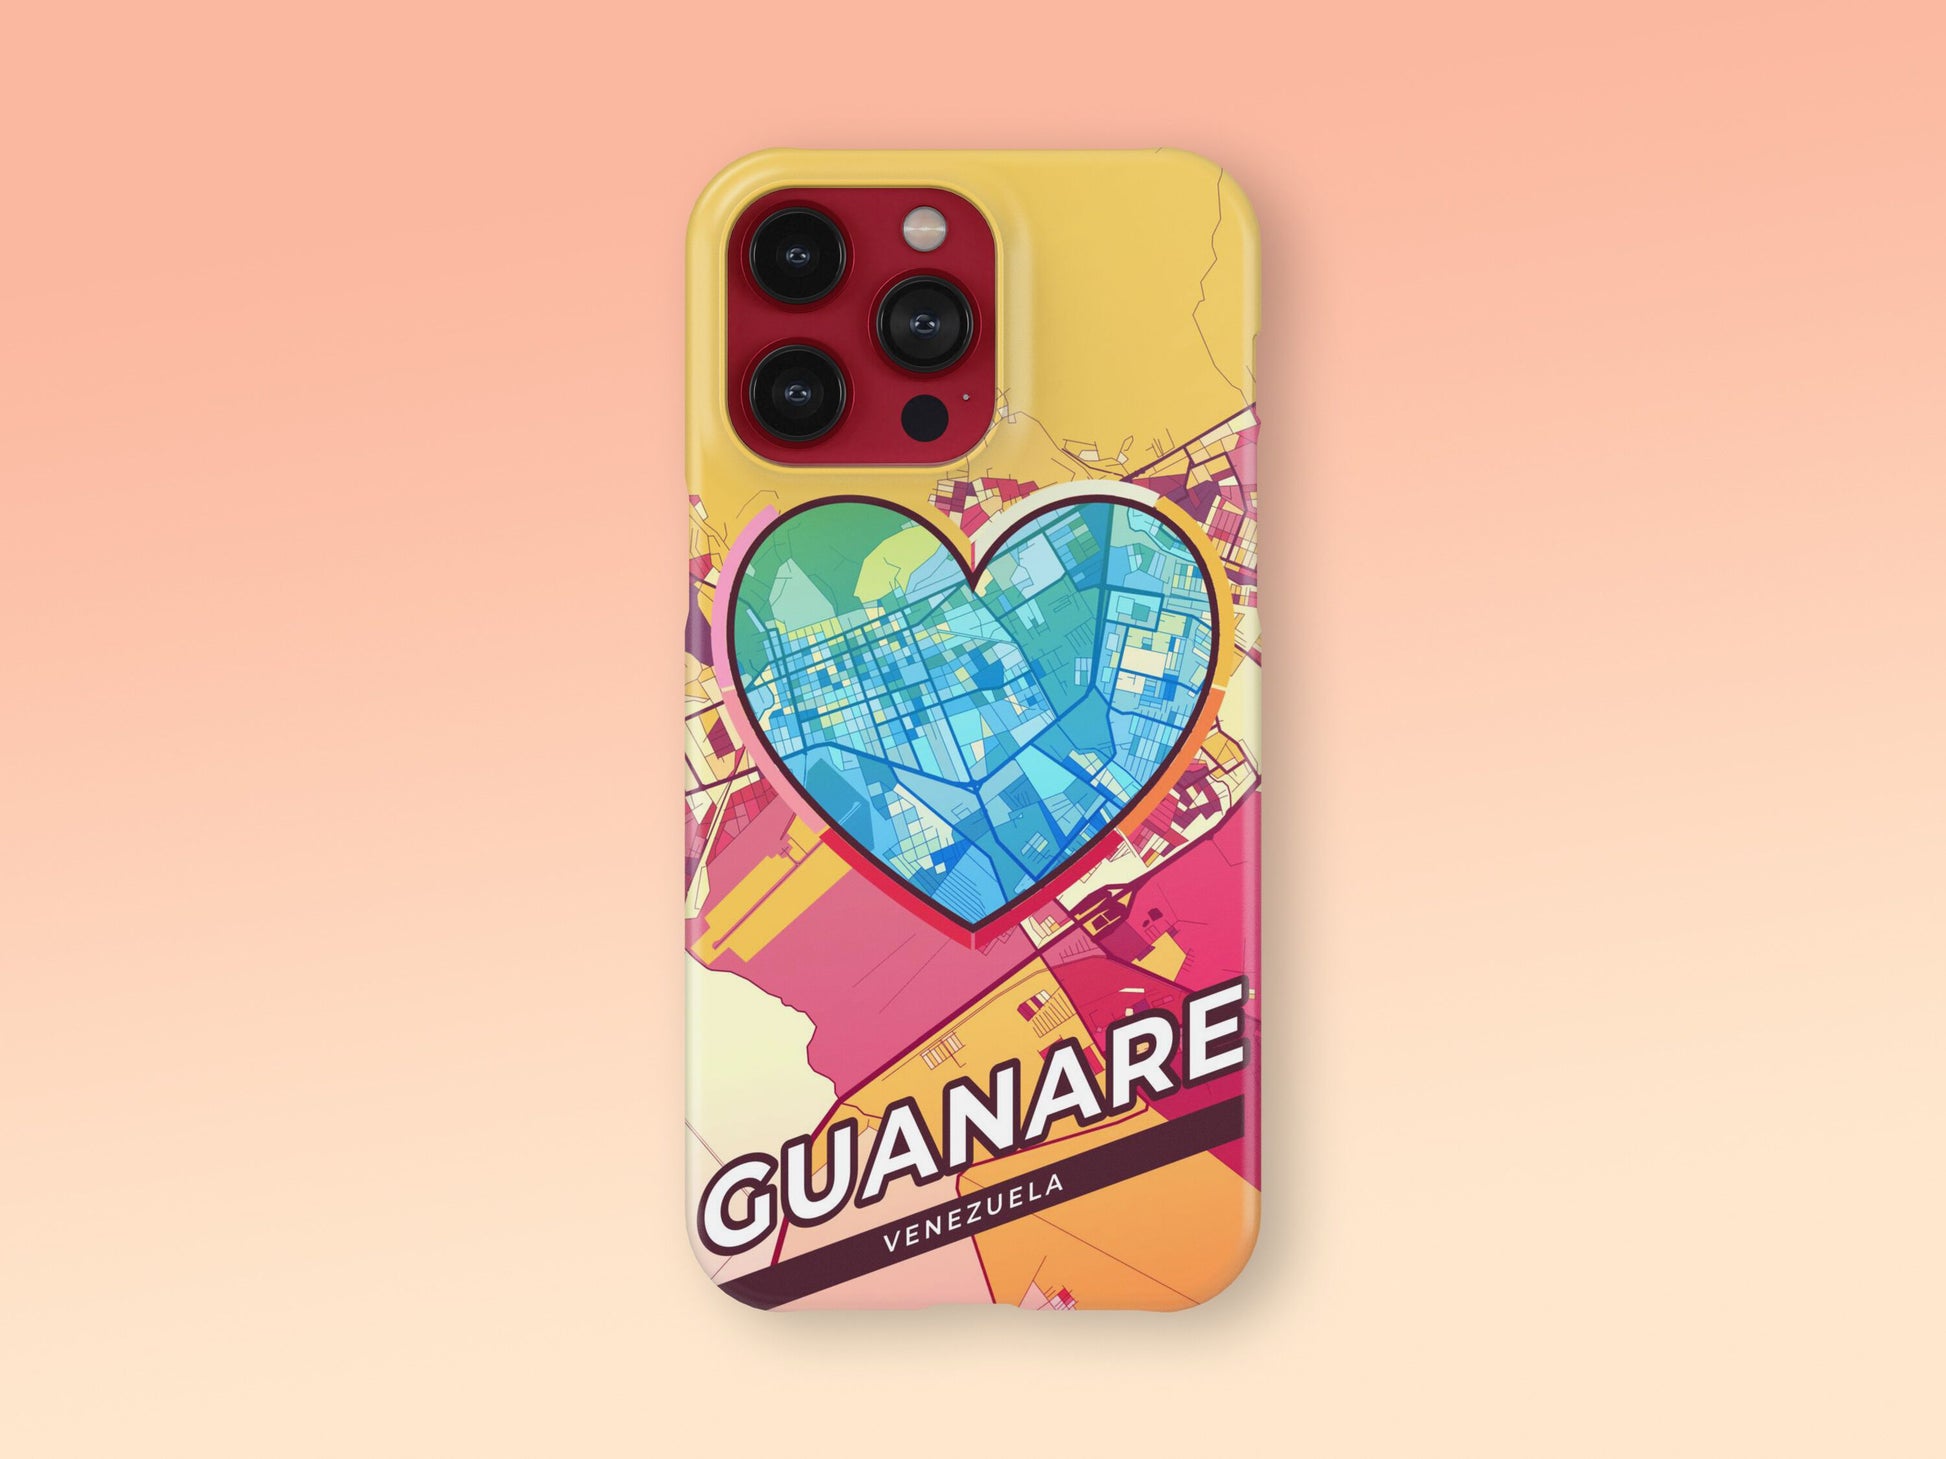 Guanare Venezuela slim phone case with colorful icon. Birthday, wedding or housewarming gift. Couple match cases. 2